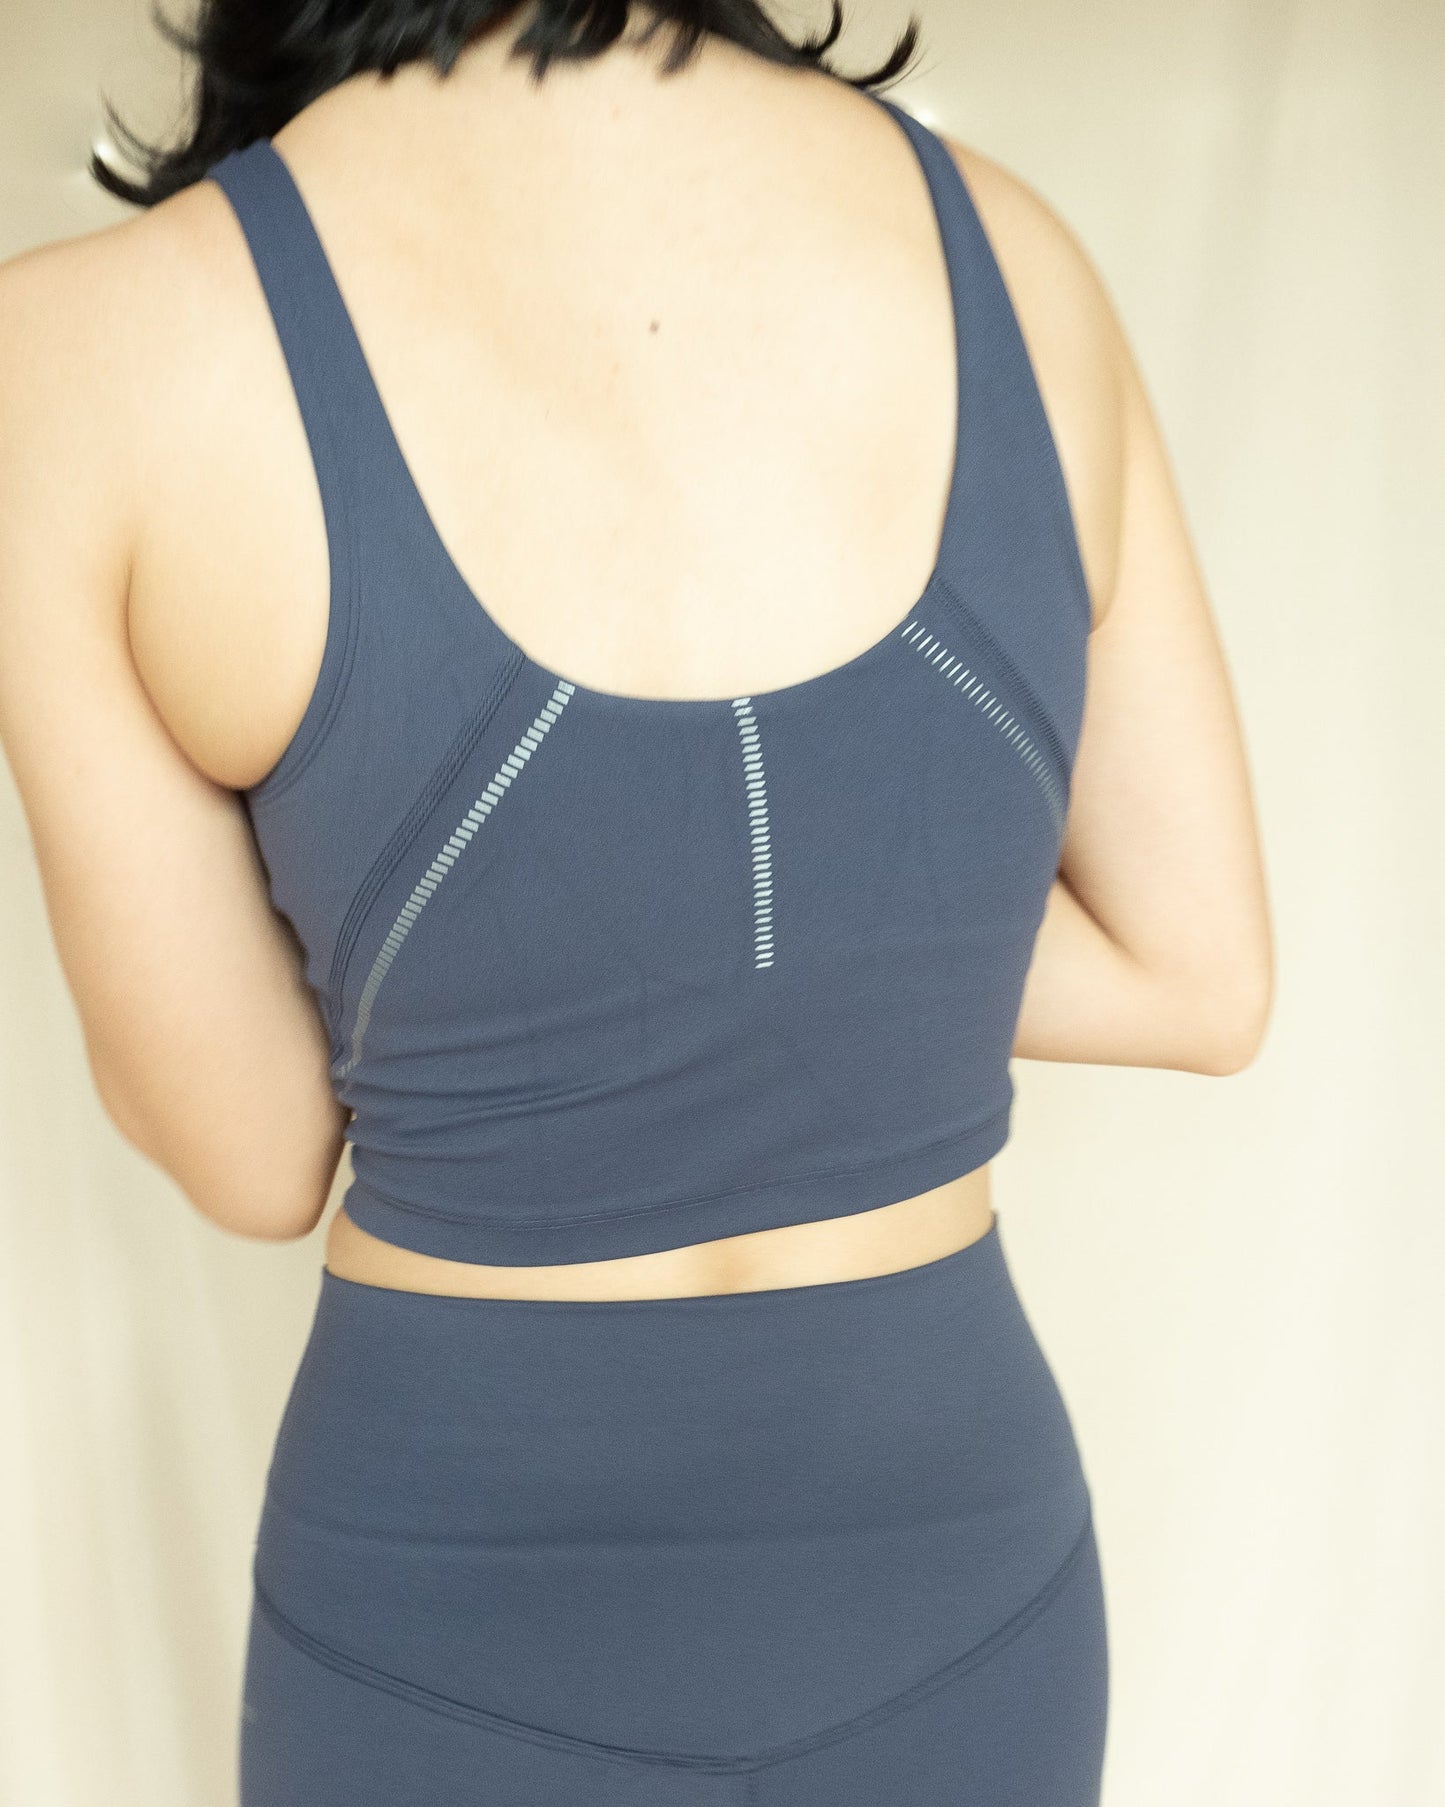 Race Top in Ceylon/Silver *Limited edition - New Day Activewear